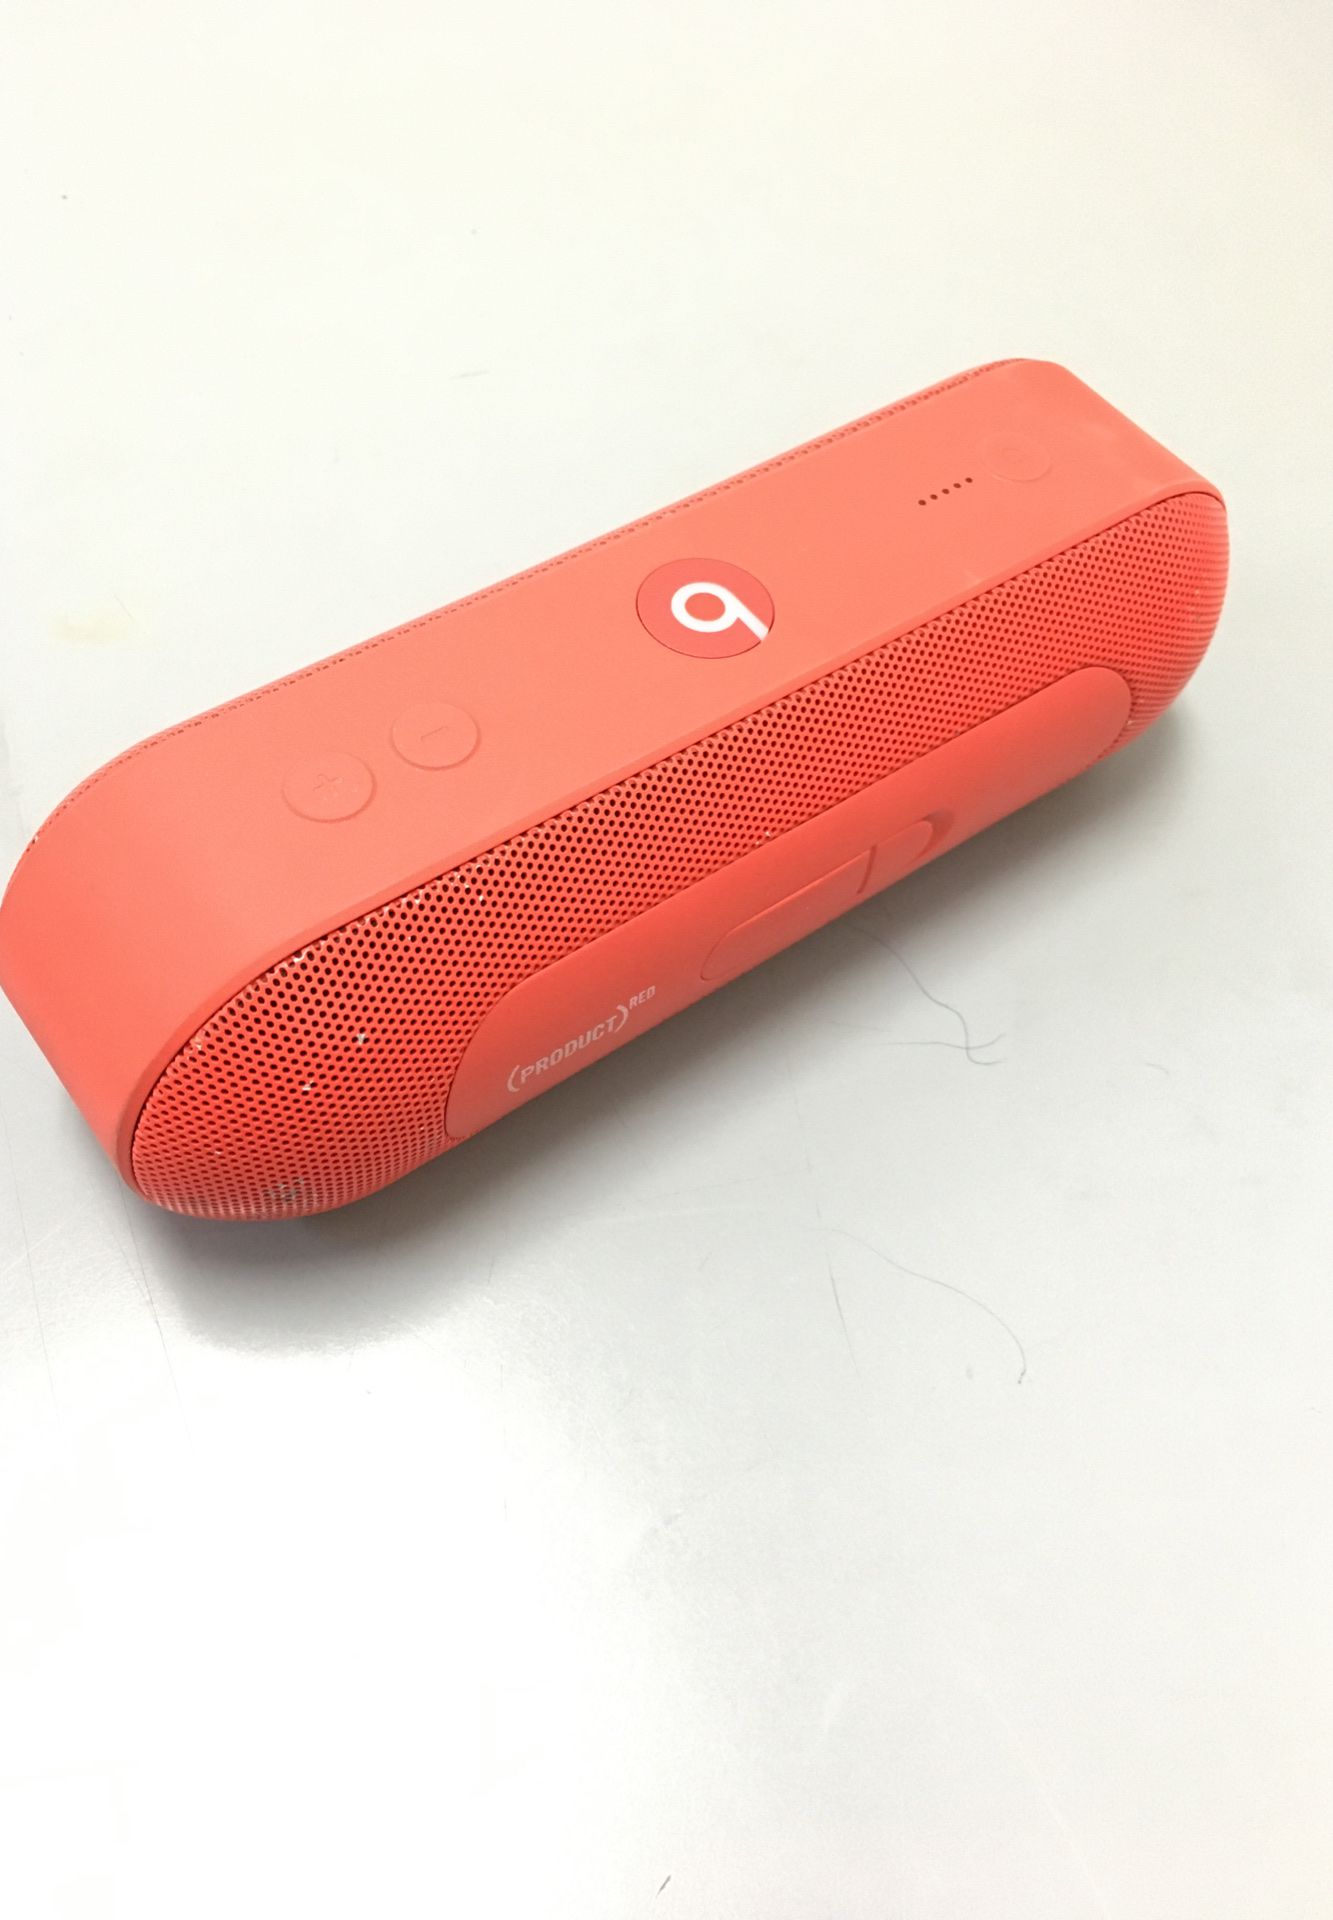 Beats audio blue tooth speaker small red pill B0513 mobile BCP006649